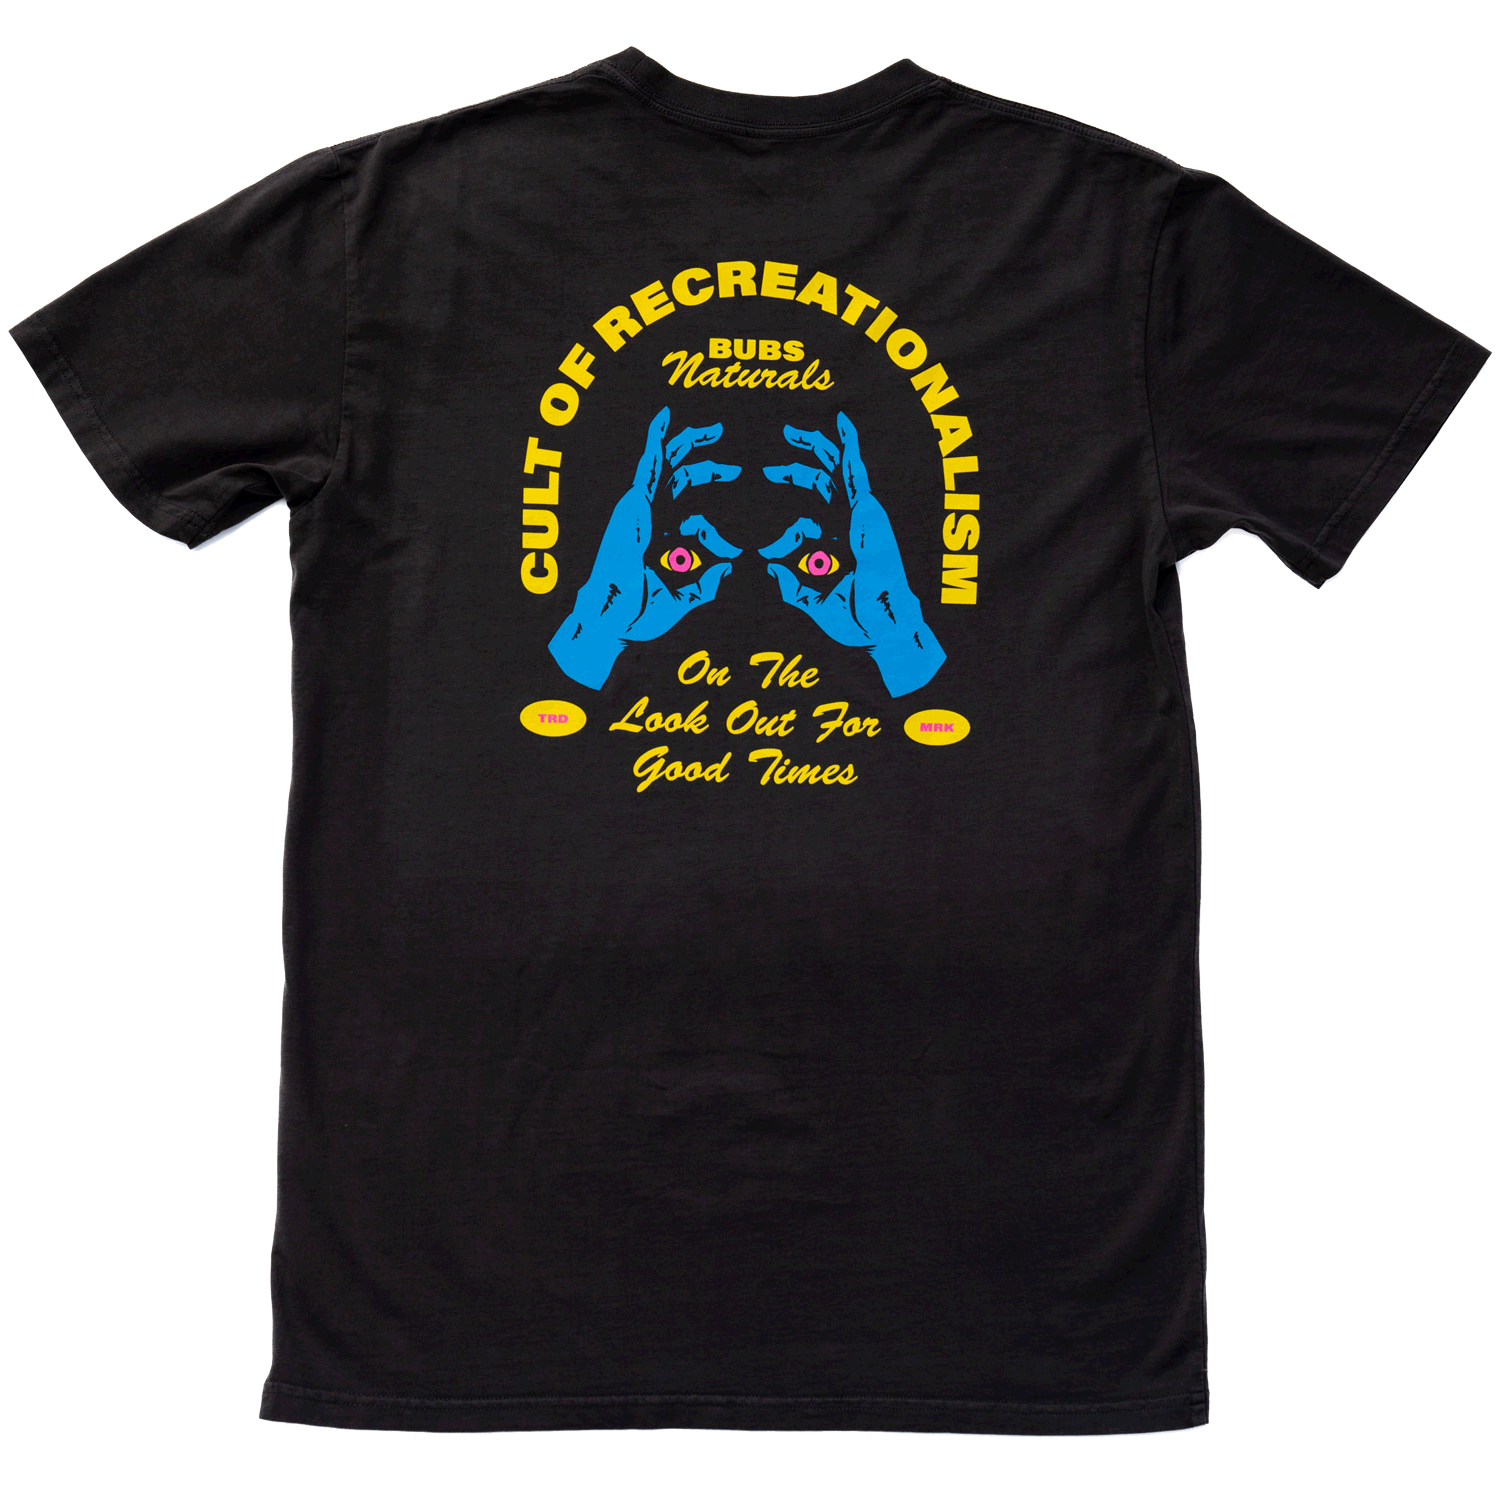 BUBS Naturals On the Lookout Black T-Shirt, Cult of Recreationalism, Back